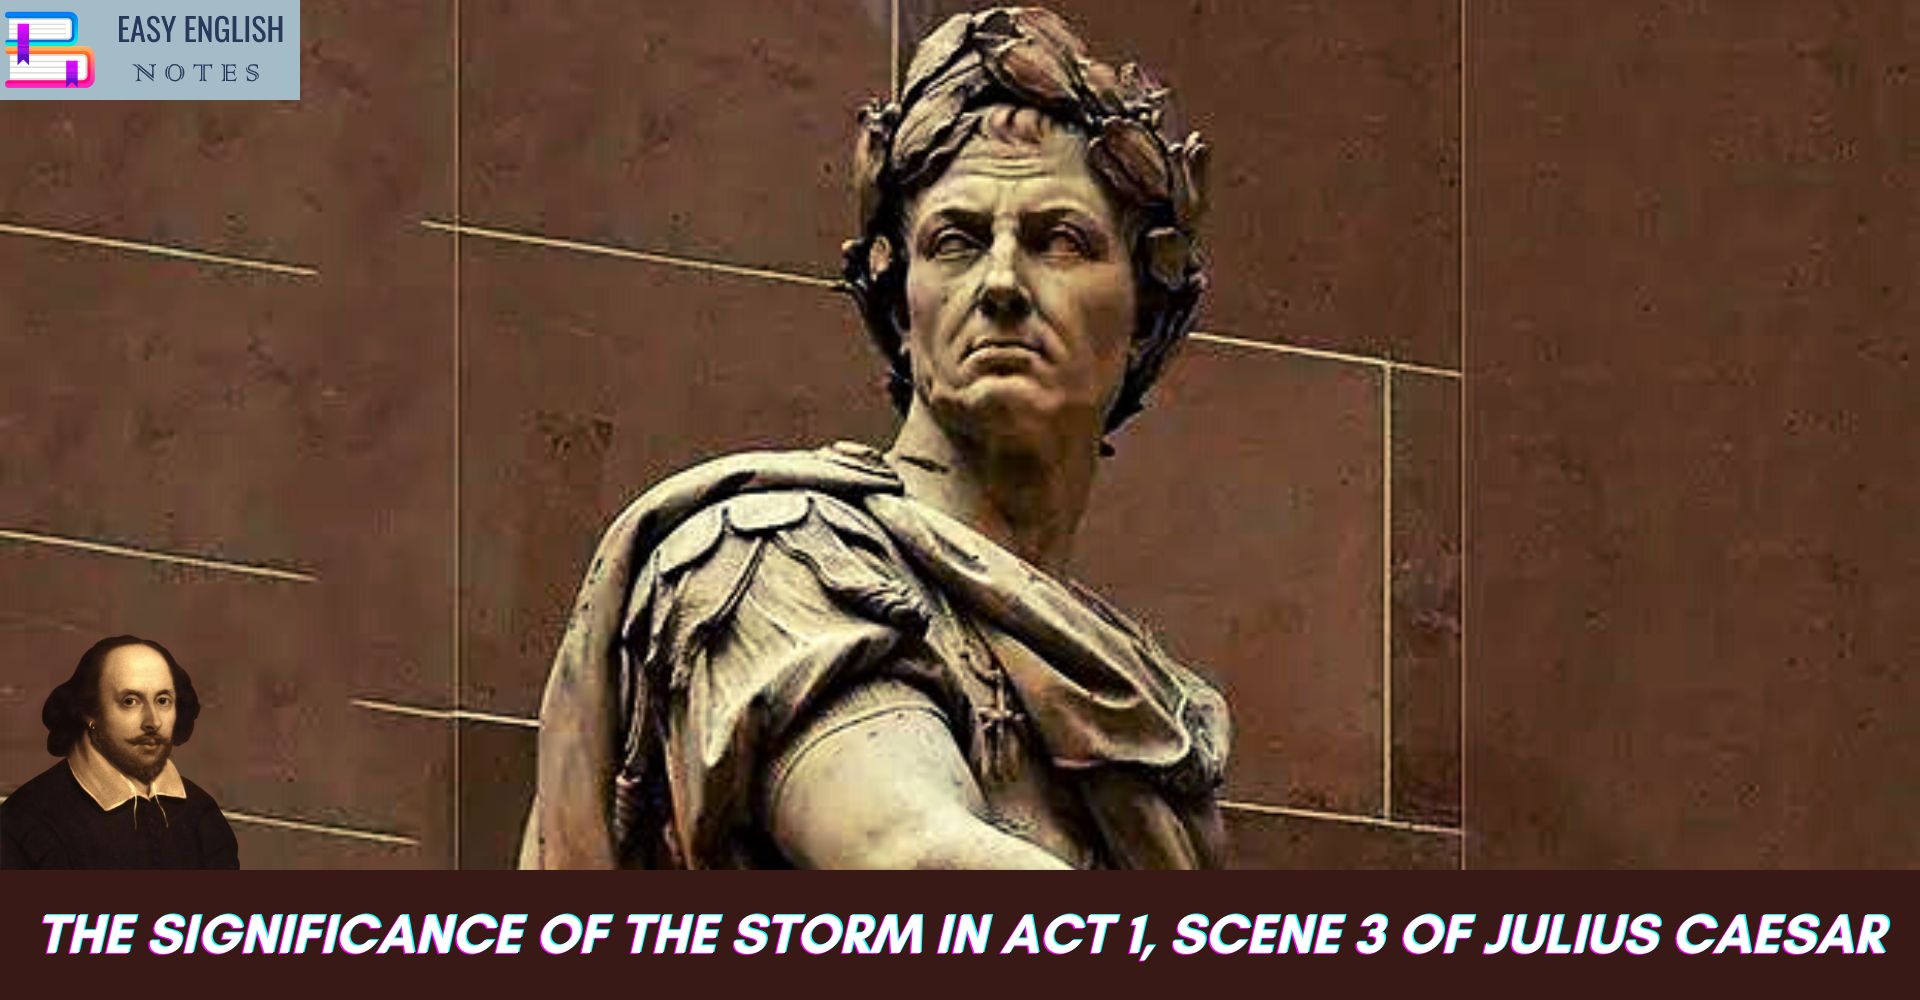 The Significance Of The Storm In Act 1, Scene 3 Of Julius Caesar